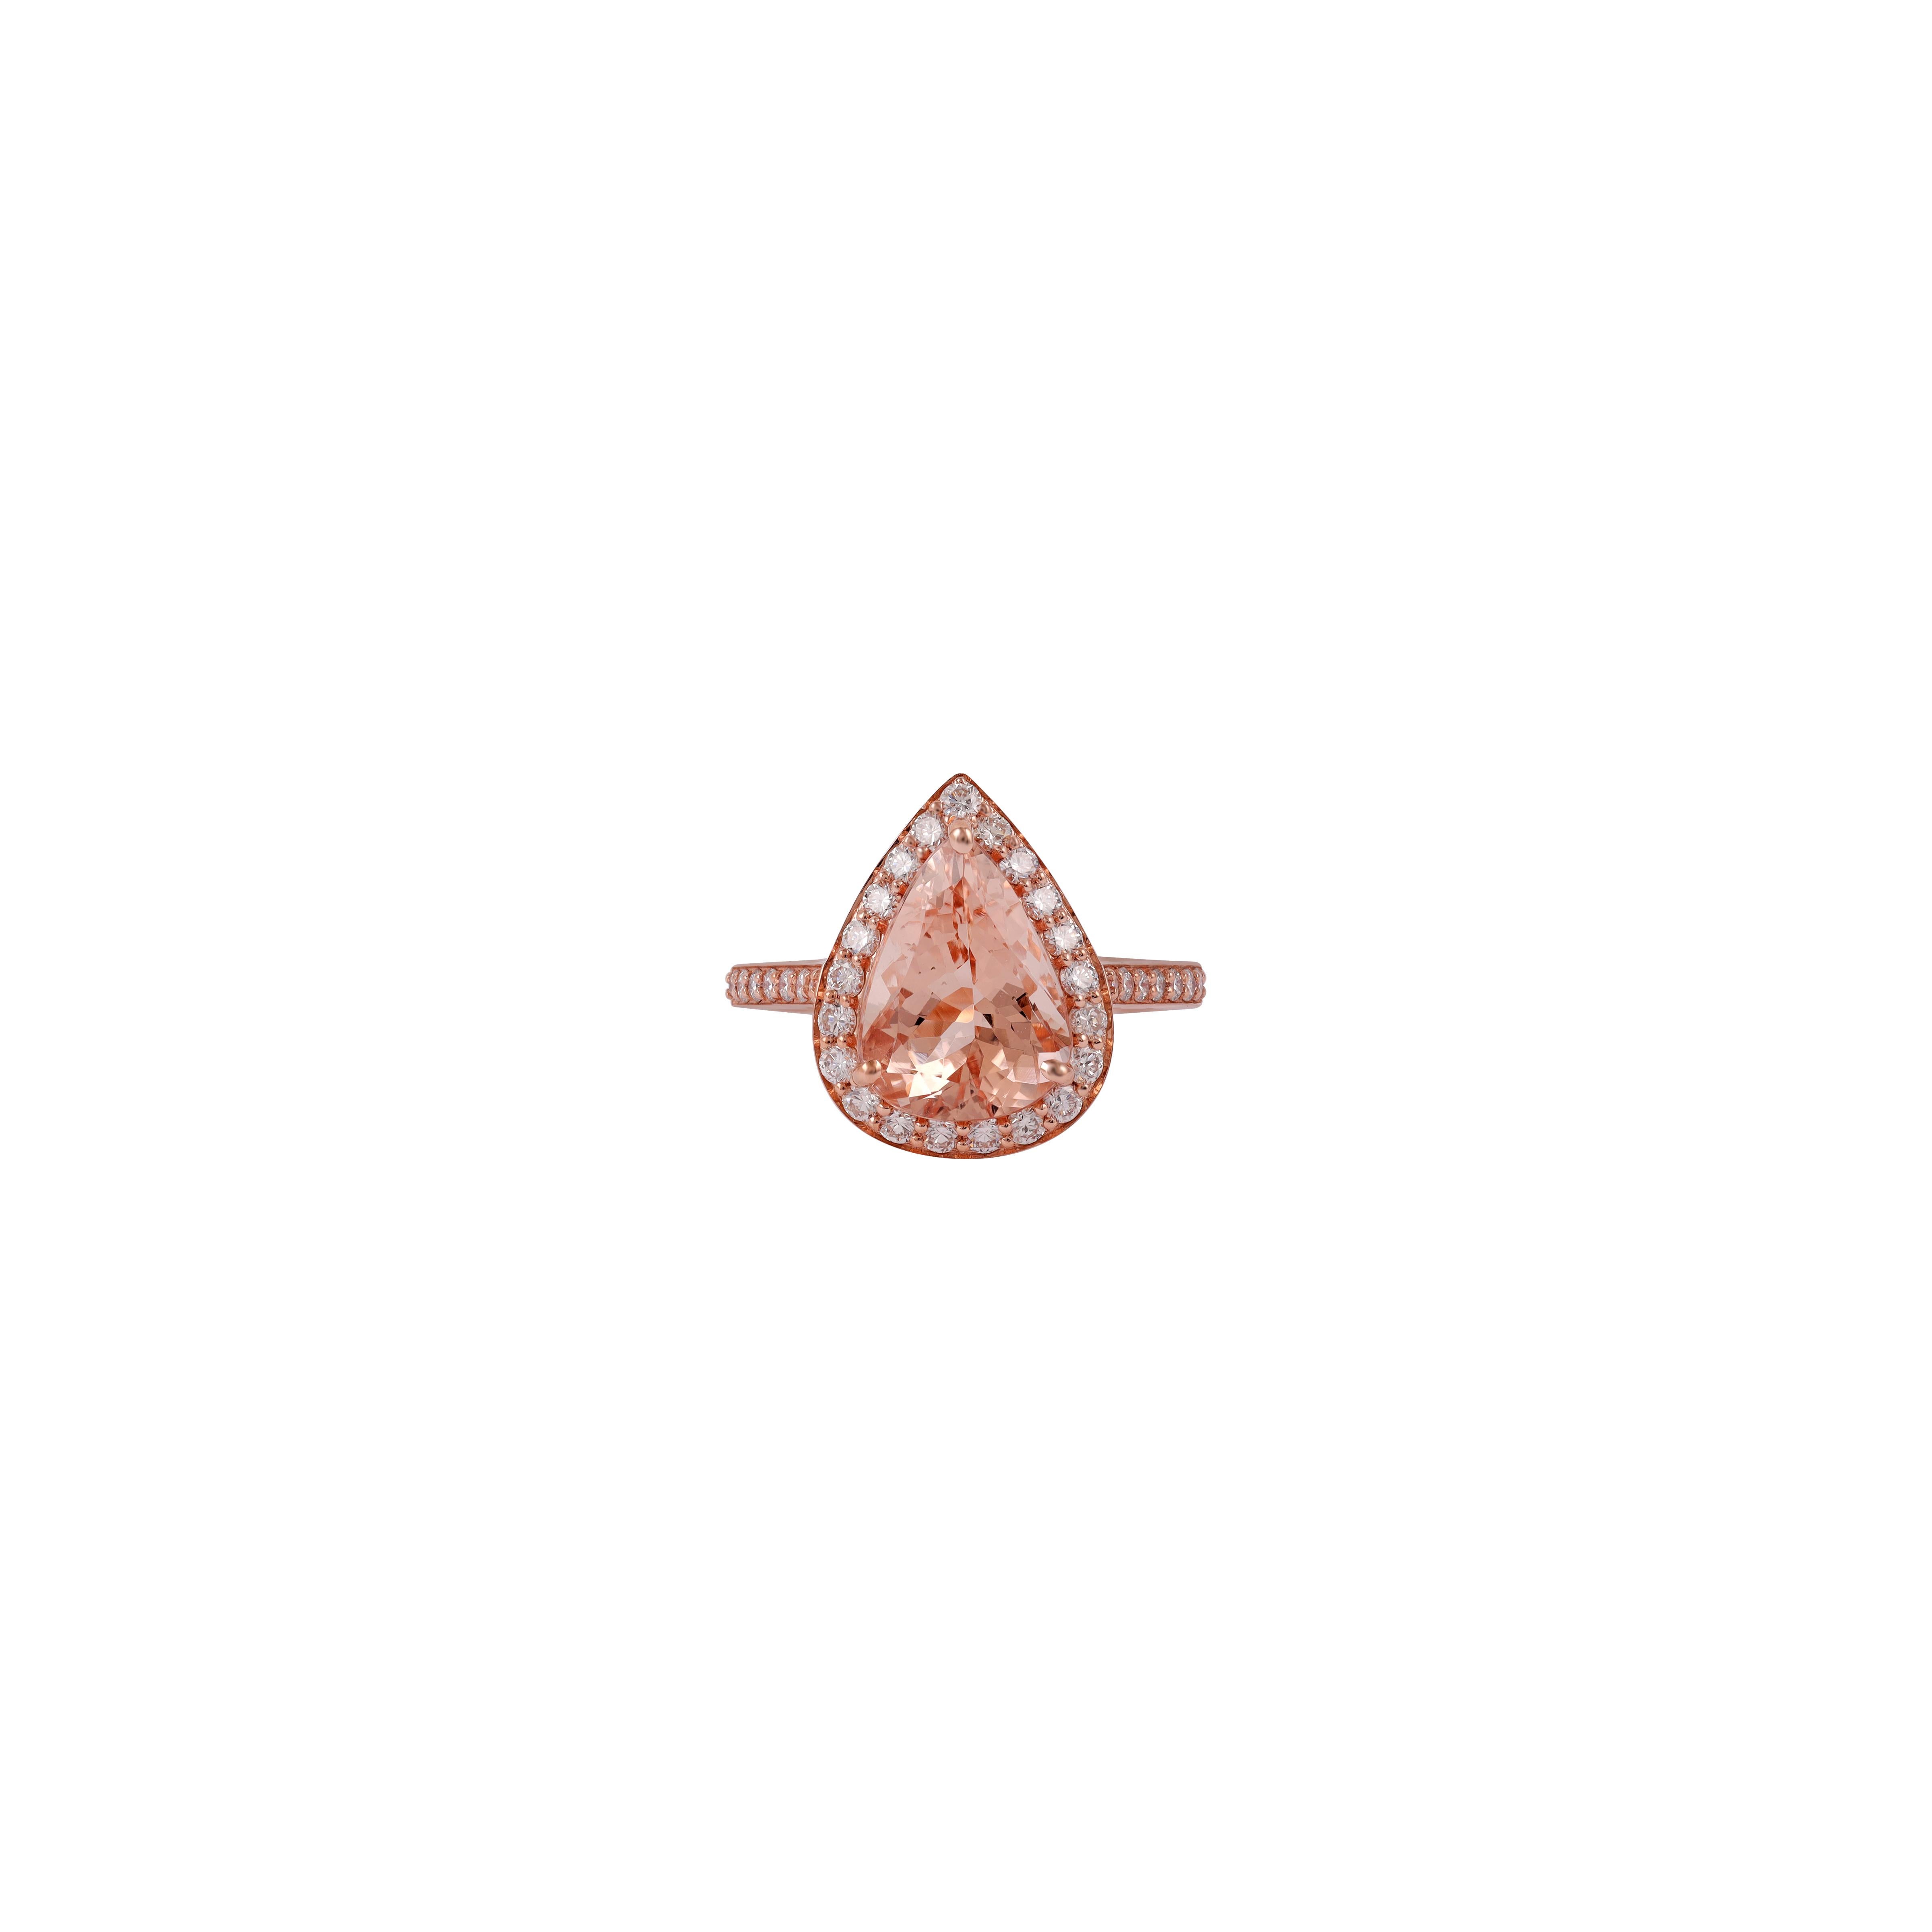 Classic Pear Shape Morganite with Round-Cut Diamond 18k Rose Gold Ring

Stunning, timeless and classy Unique Ring. Decorate yourself in luxury with this Gin & Grace Ring. The 18K Rose Gold jewelry boasts with Pear-cut 1 pcs 3.29 carat Morganite and